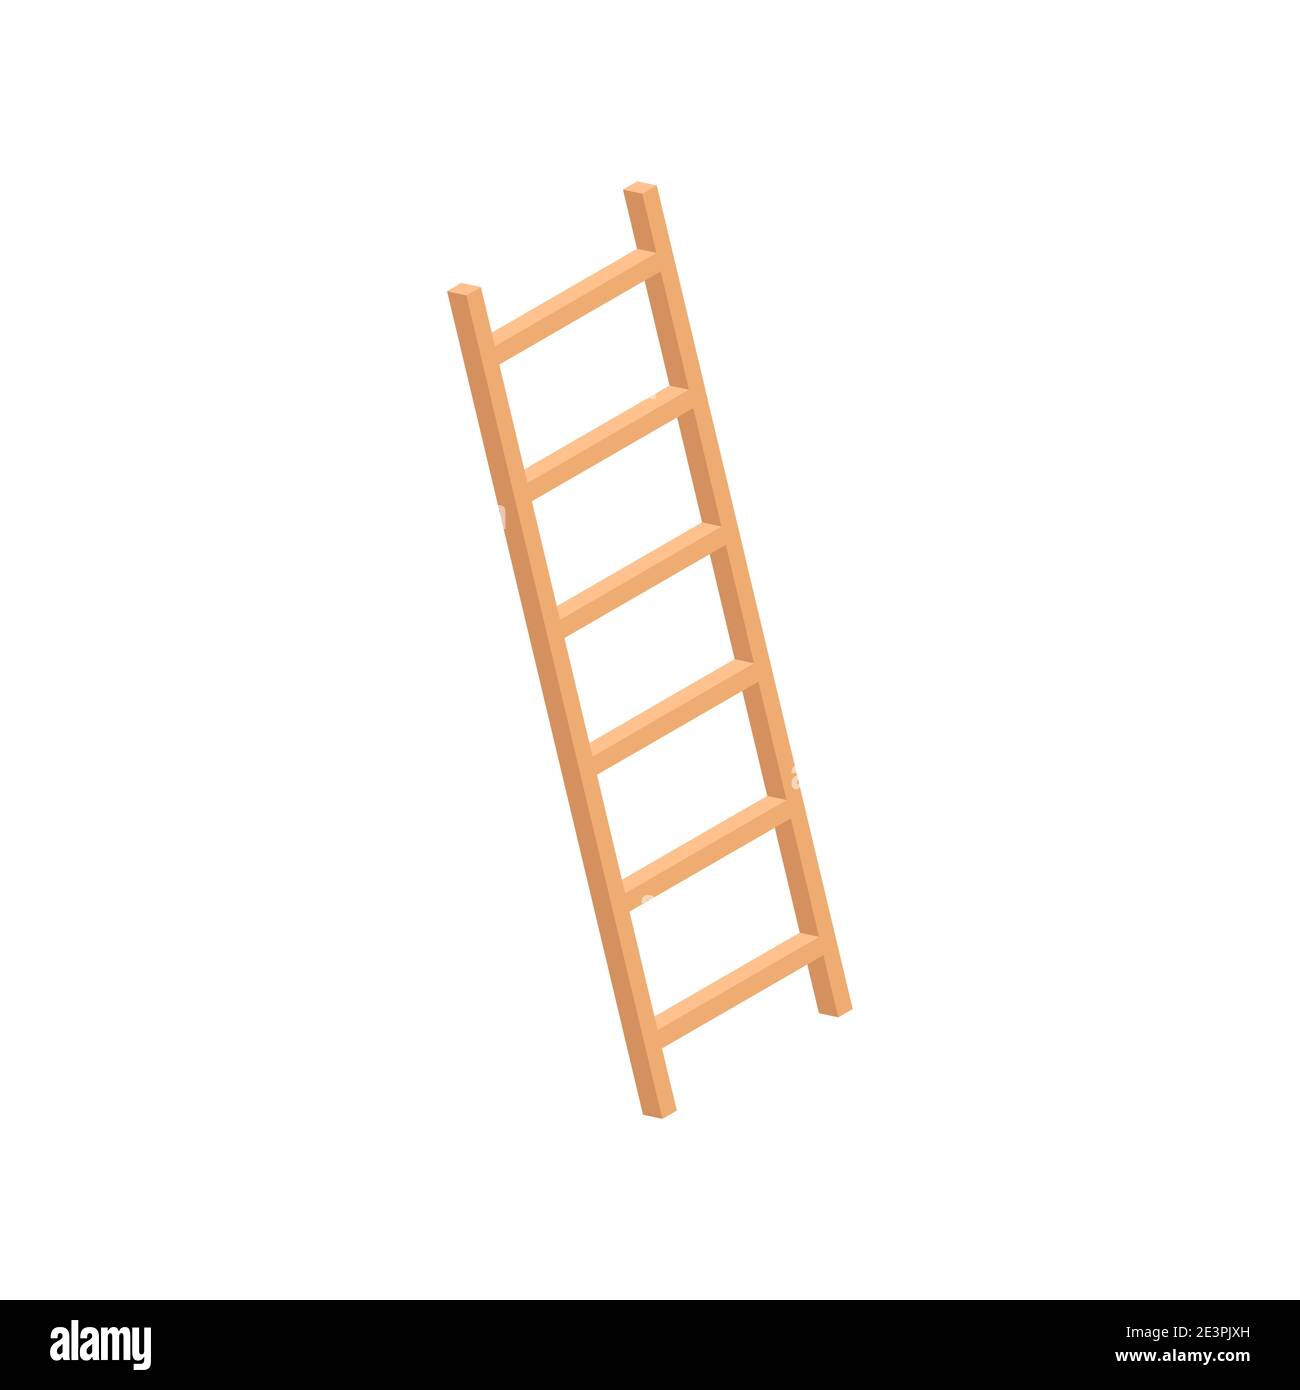 Isometric ladder stair vector staircase. Isolated ladder equipment cartoon wooden staircase Stock Vector